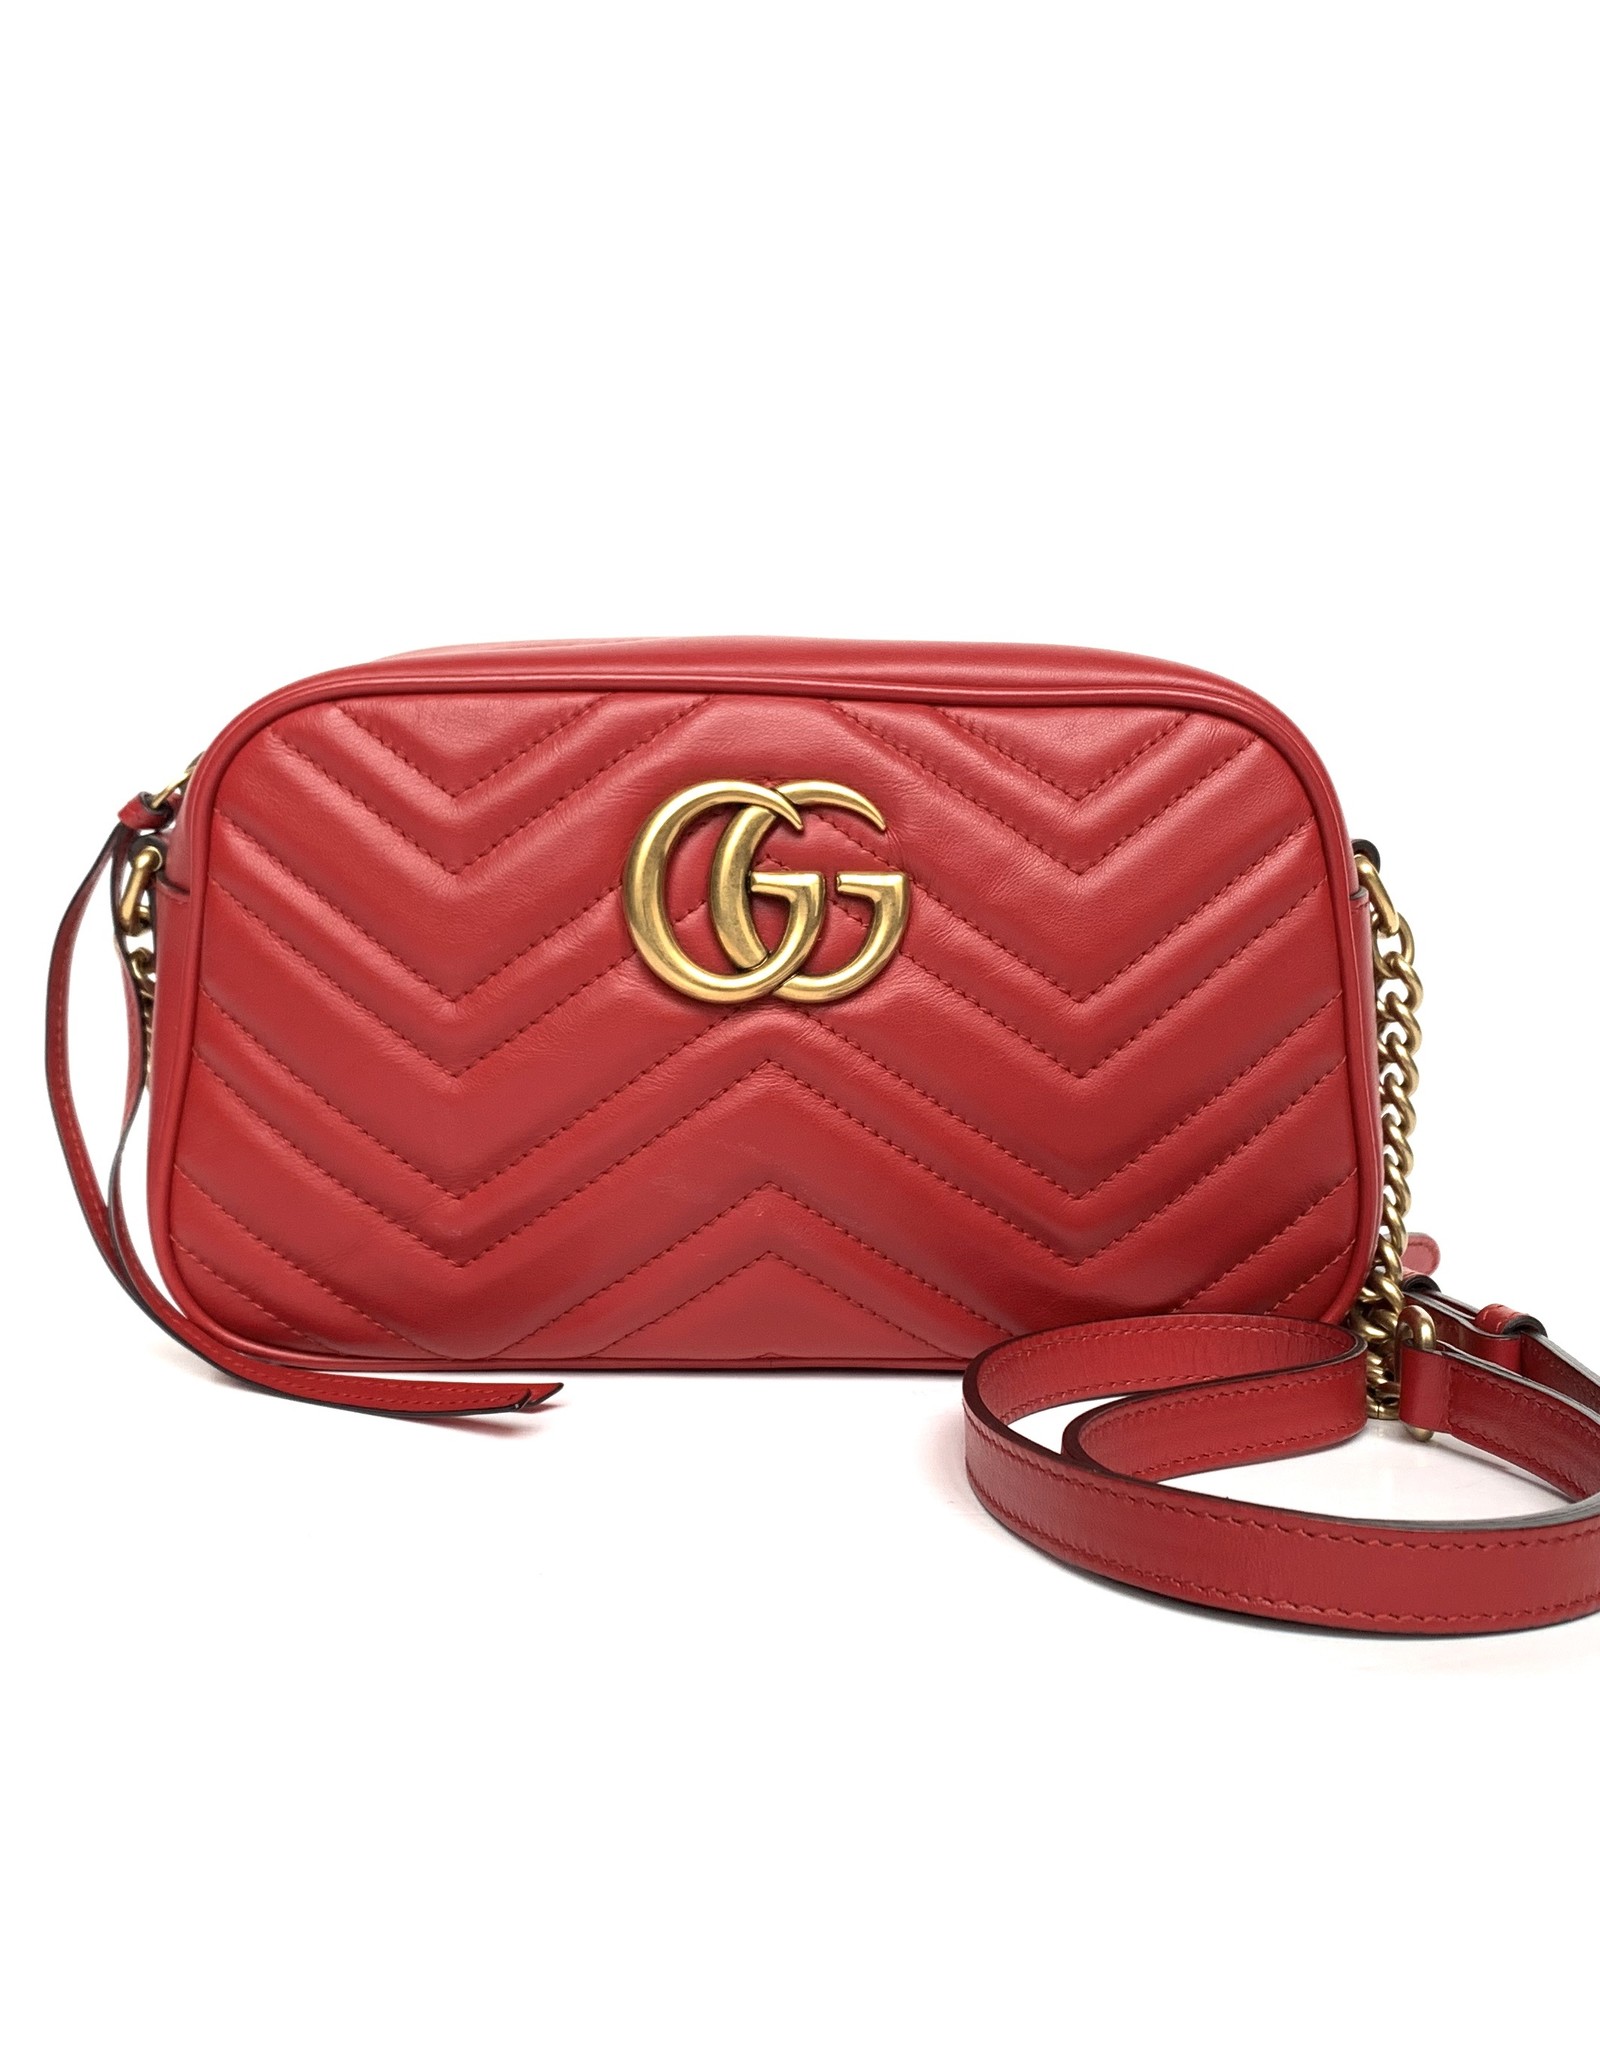 Gucci Marmont small shoulder bag red - Love pre-owned bags